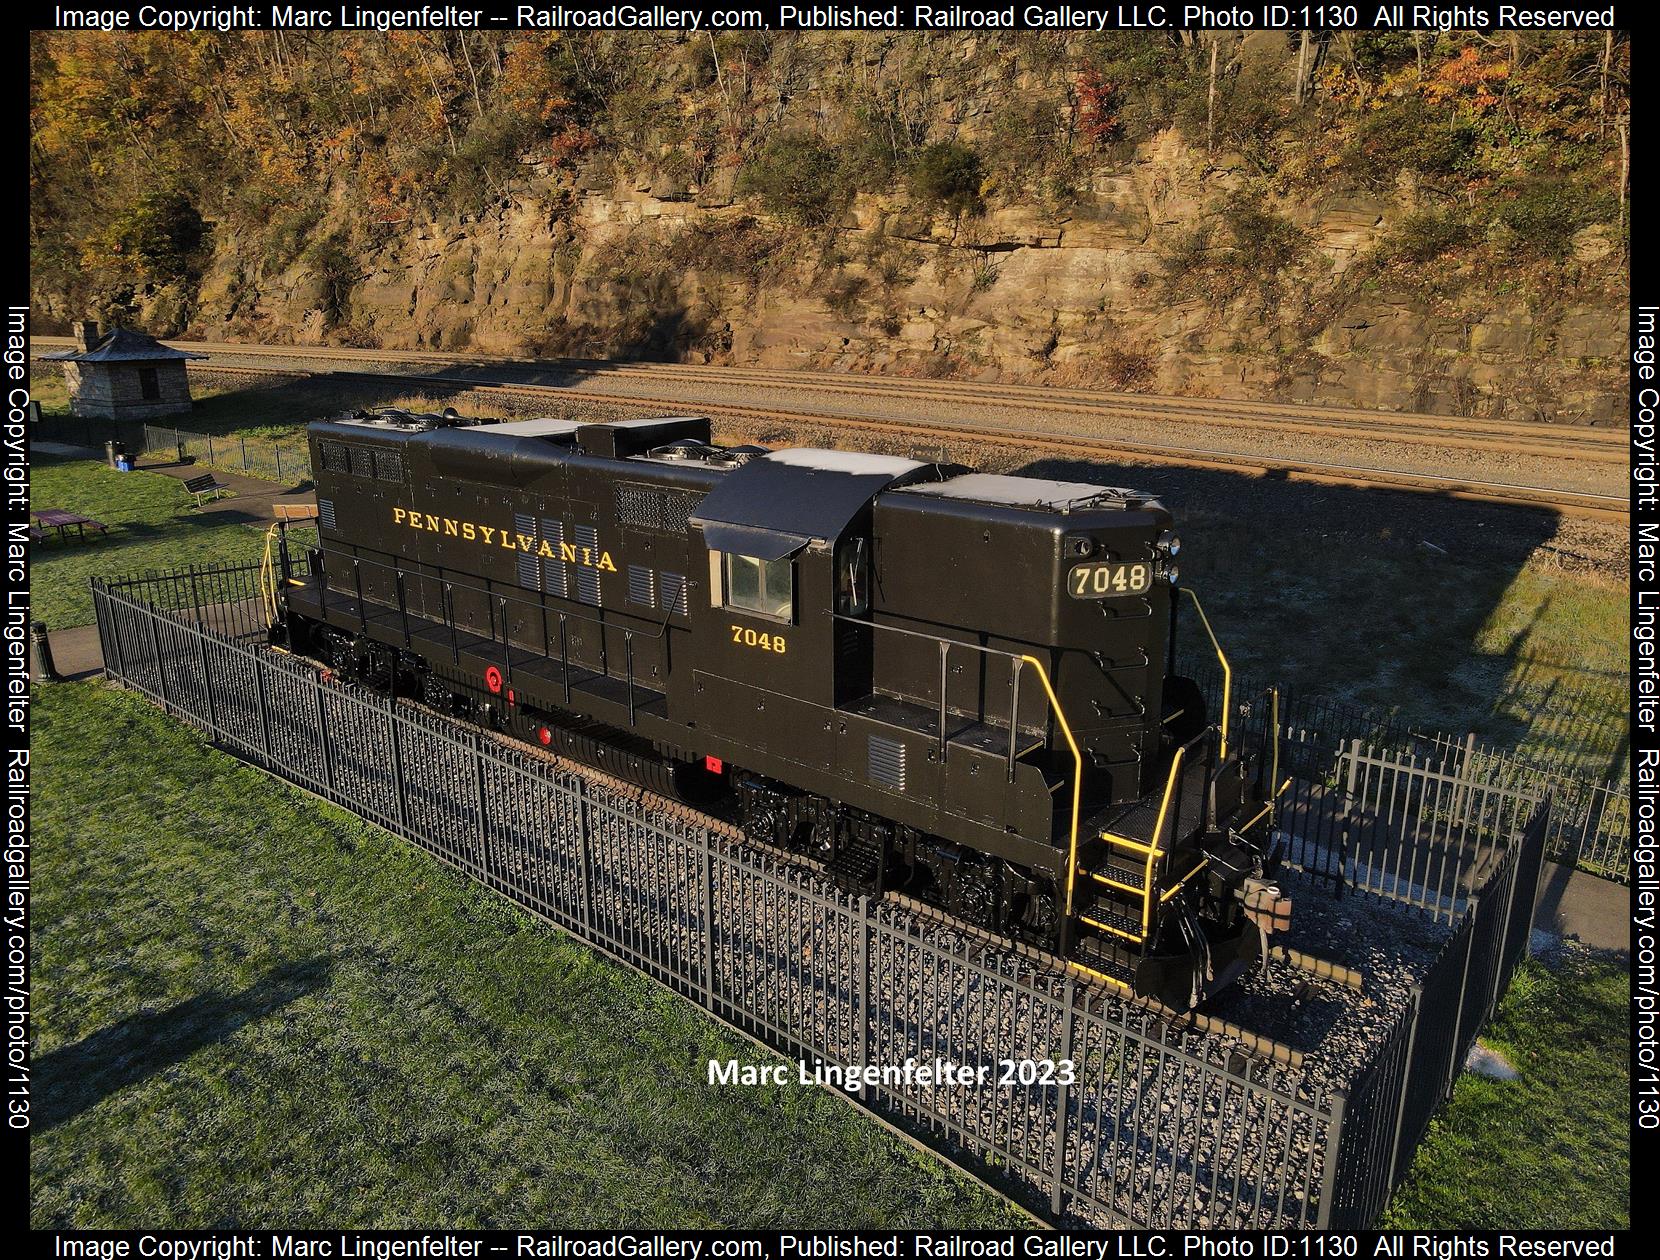 PRR 7048 is a class EMD GP9 and  is pictured in Altoona, Pennsylvania, USA.  This was taken along the Horseshoe Curve on the Pennsylvania Railroad. Photo Copyright: Marc Lingenfelter uploaded to Railroad Gallery on 06/12/2023. This photograph of PRR 7048 was taken on Wednesday, November 03, 2021. All Rights Reserved. 